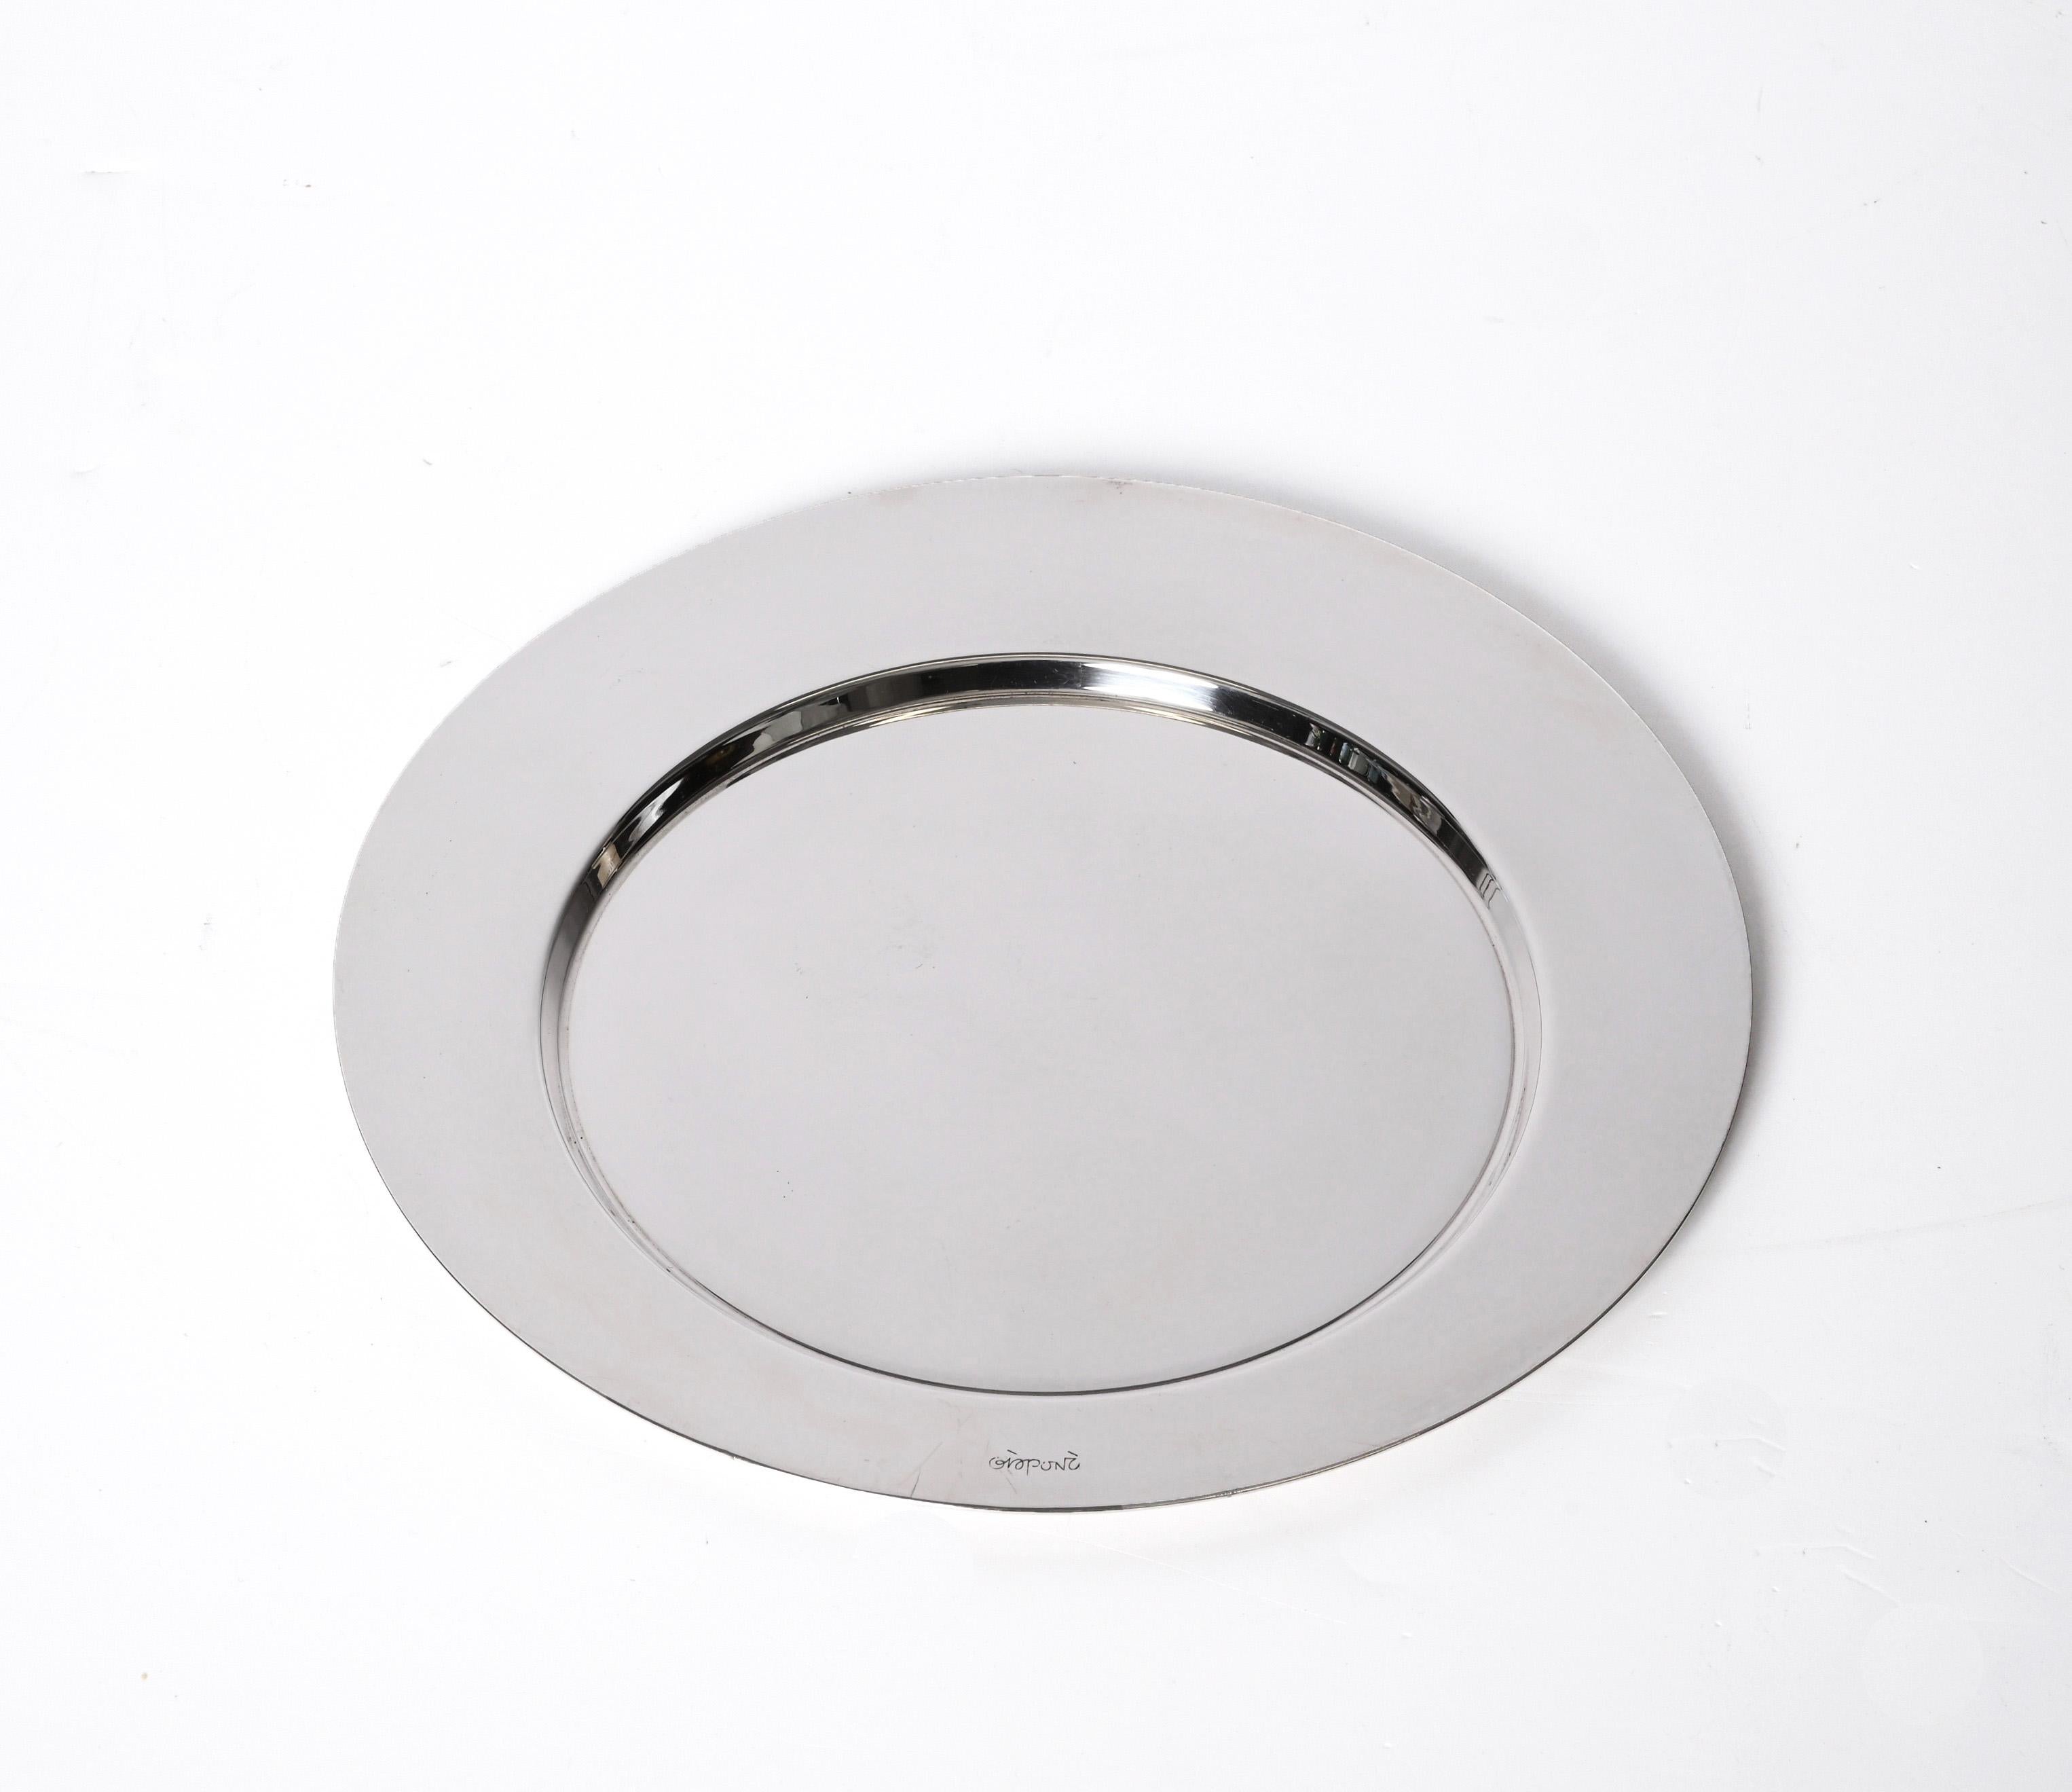 Gio Ponti for Cleto Munari Modernist Silver Plated Serving Plate Italy, 1980s 1